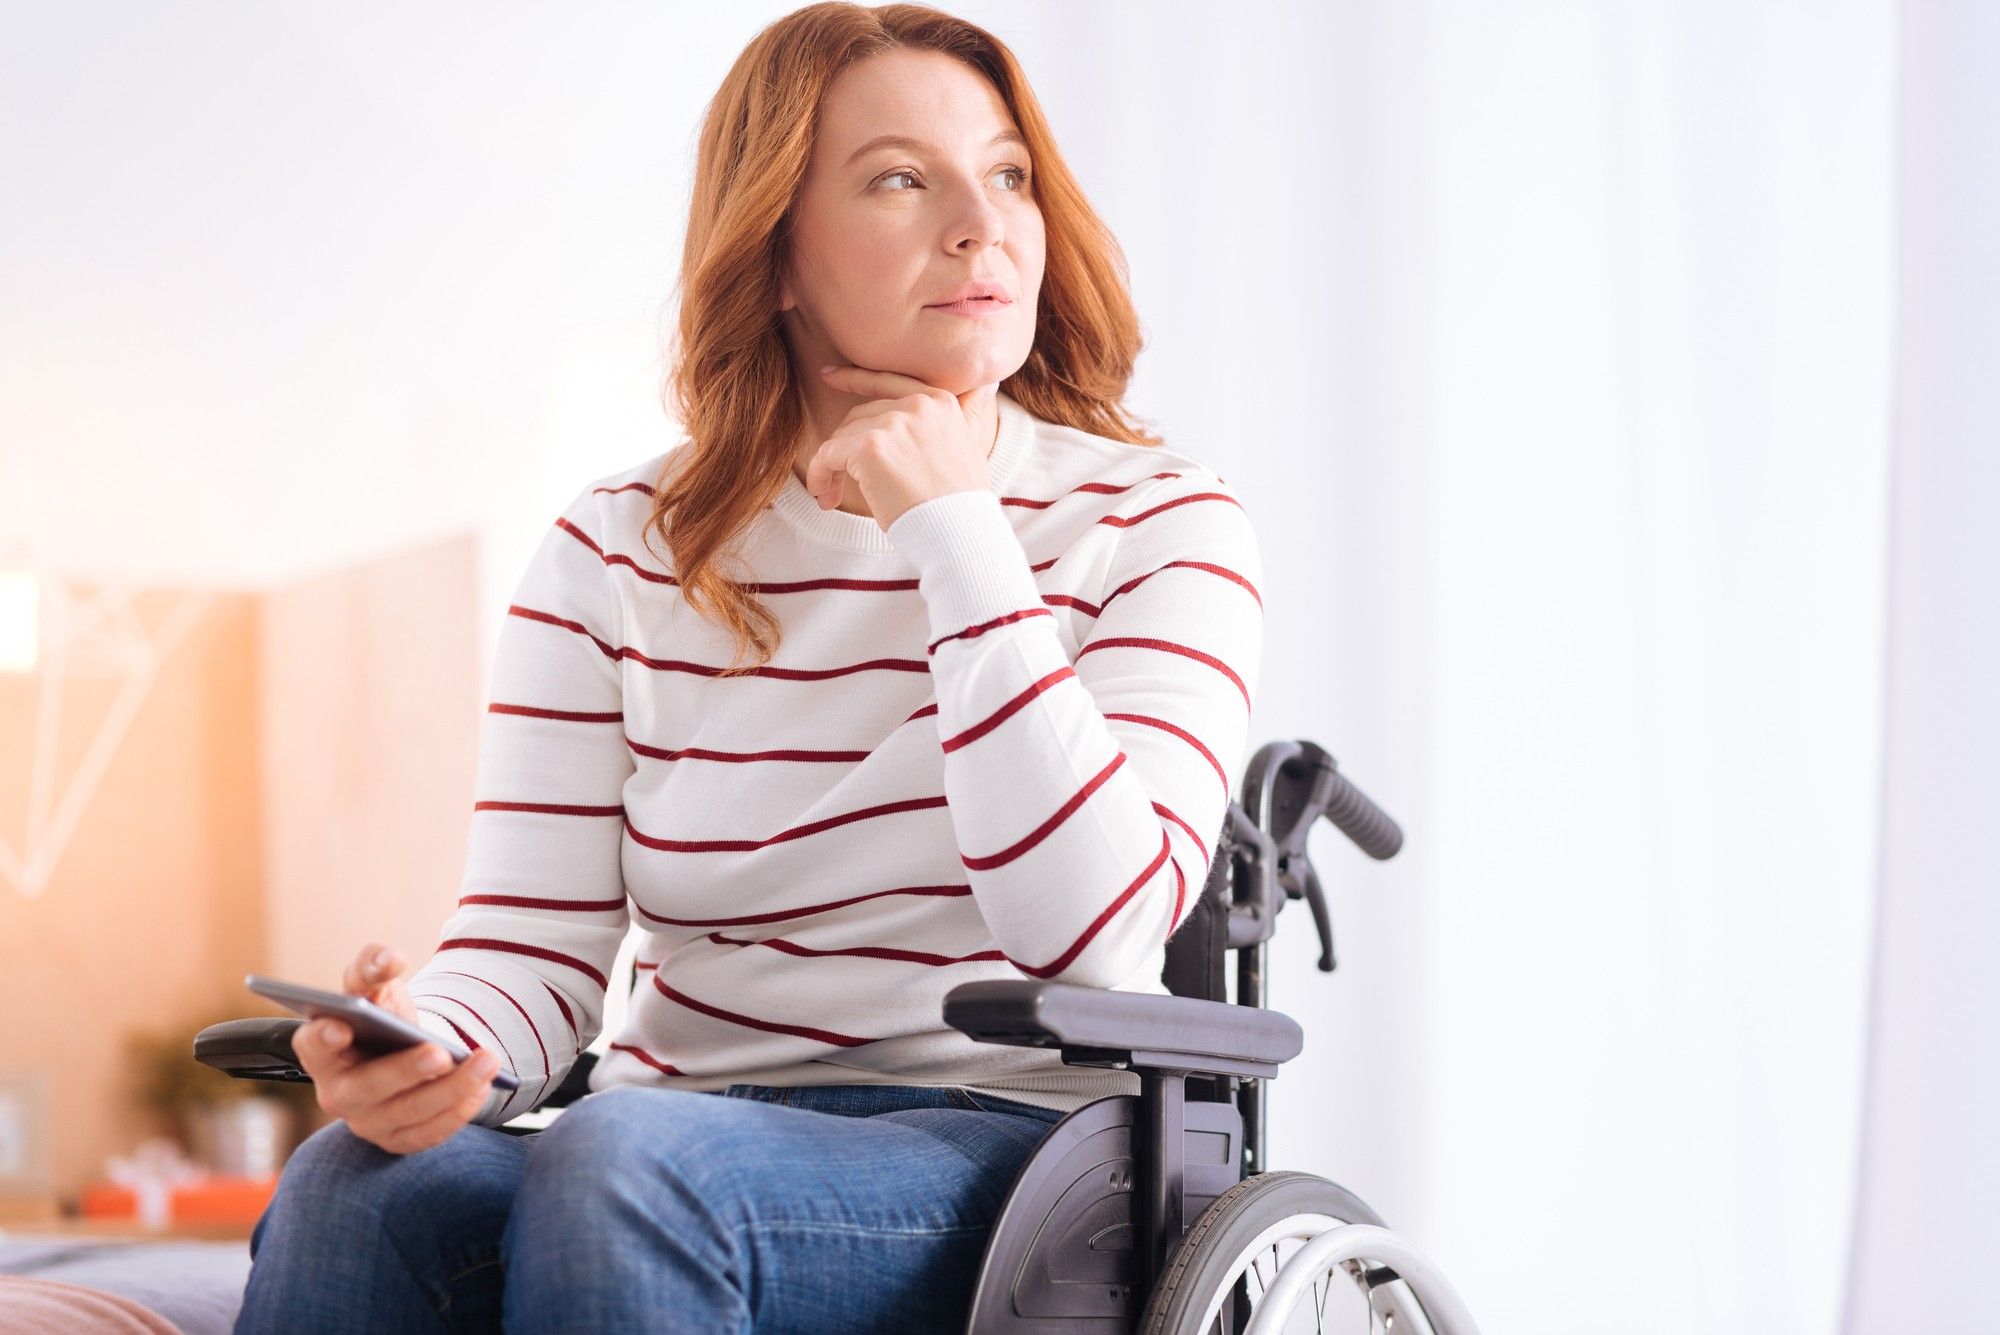 Filing a disability appeal can be challenging.